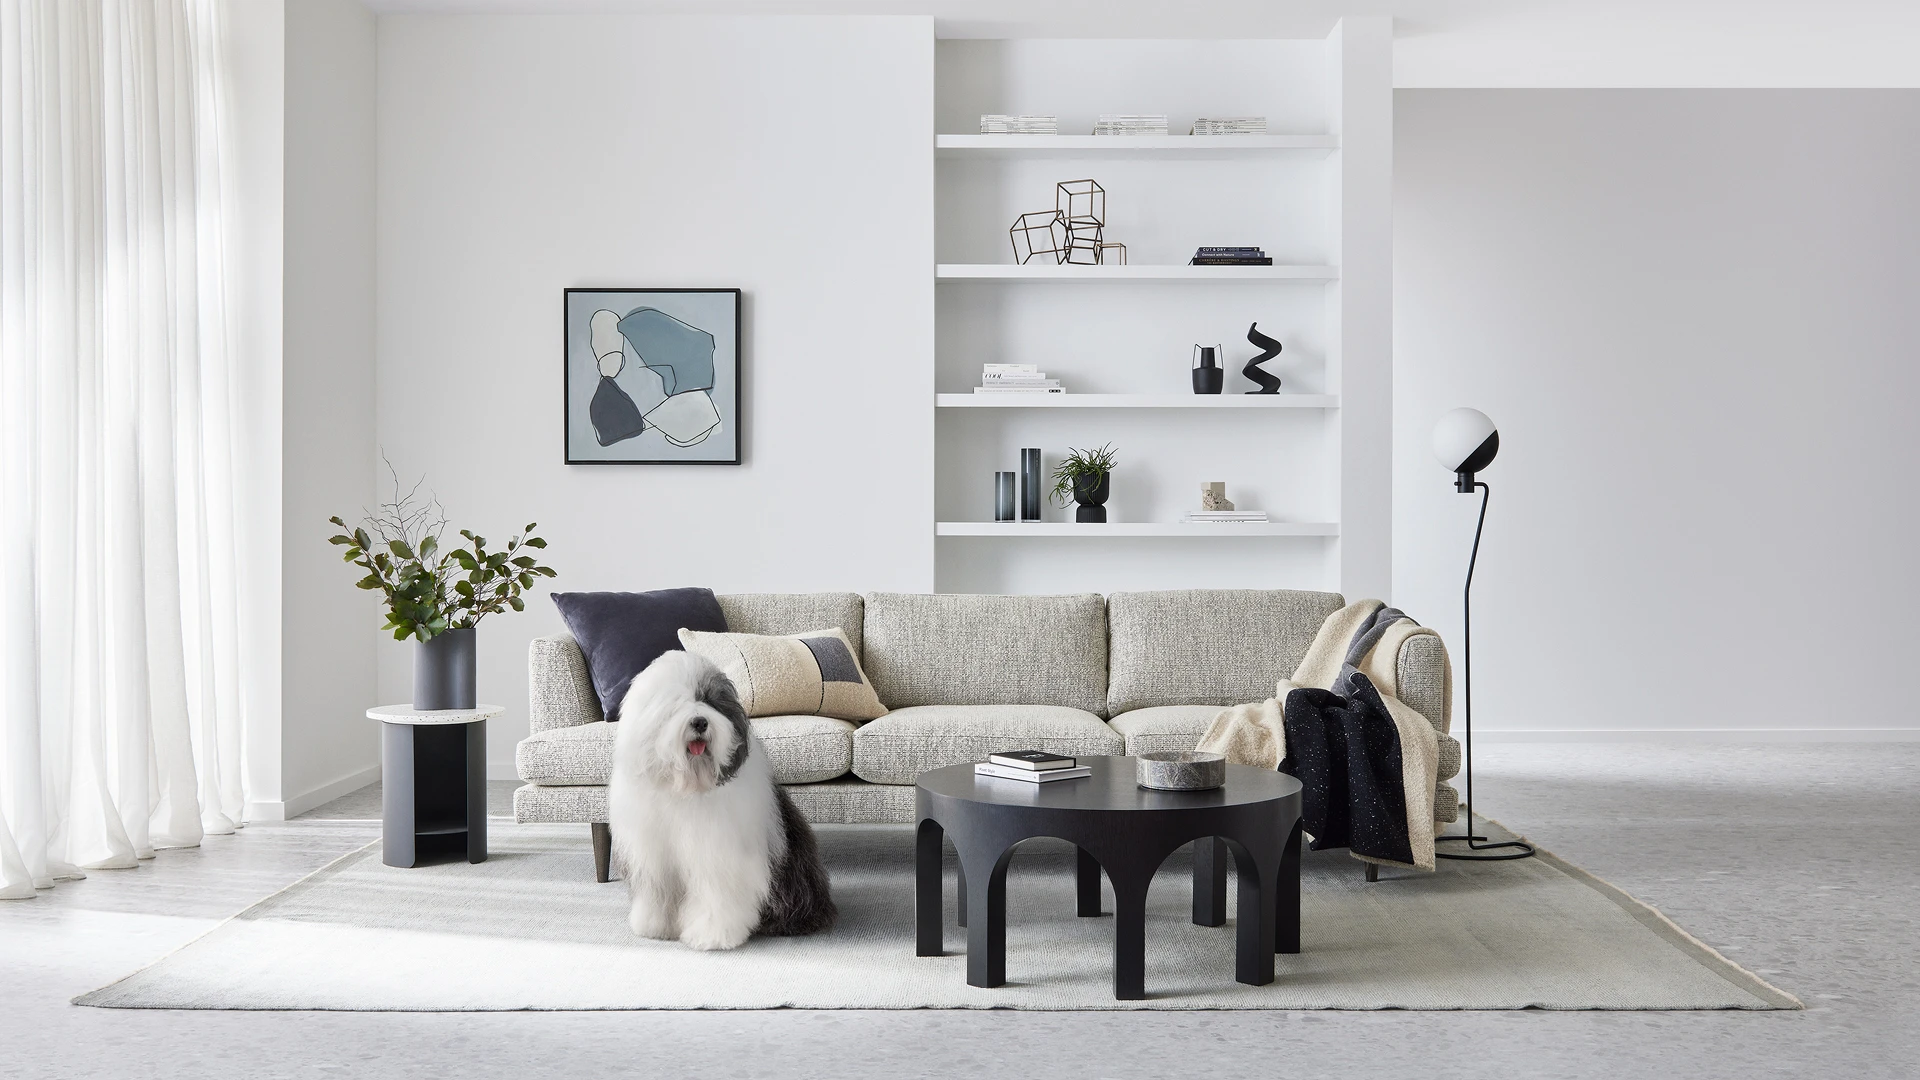 Interior living room with Ōkārito featuring on back wall, Dulux dog, textured couch and coffee table.